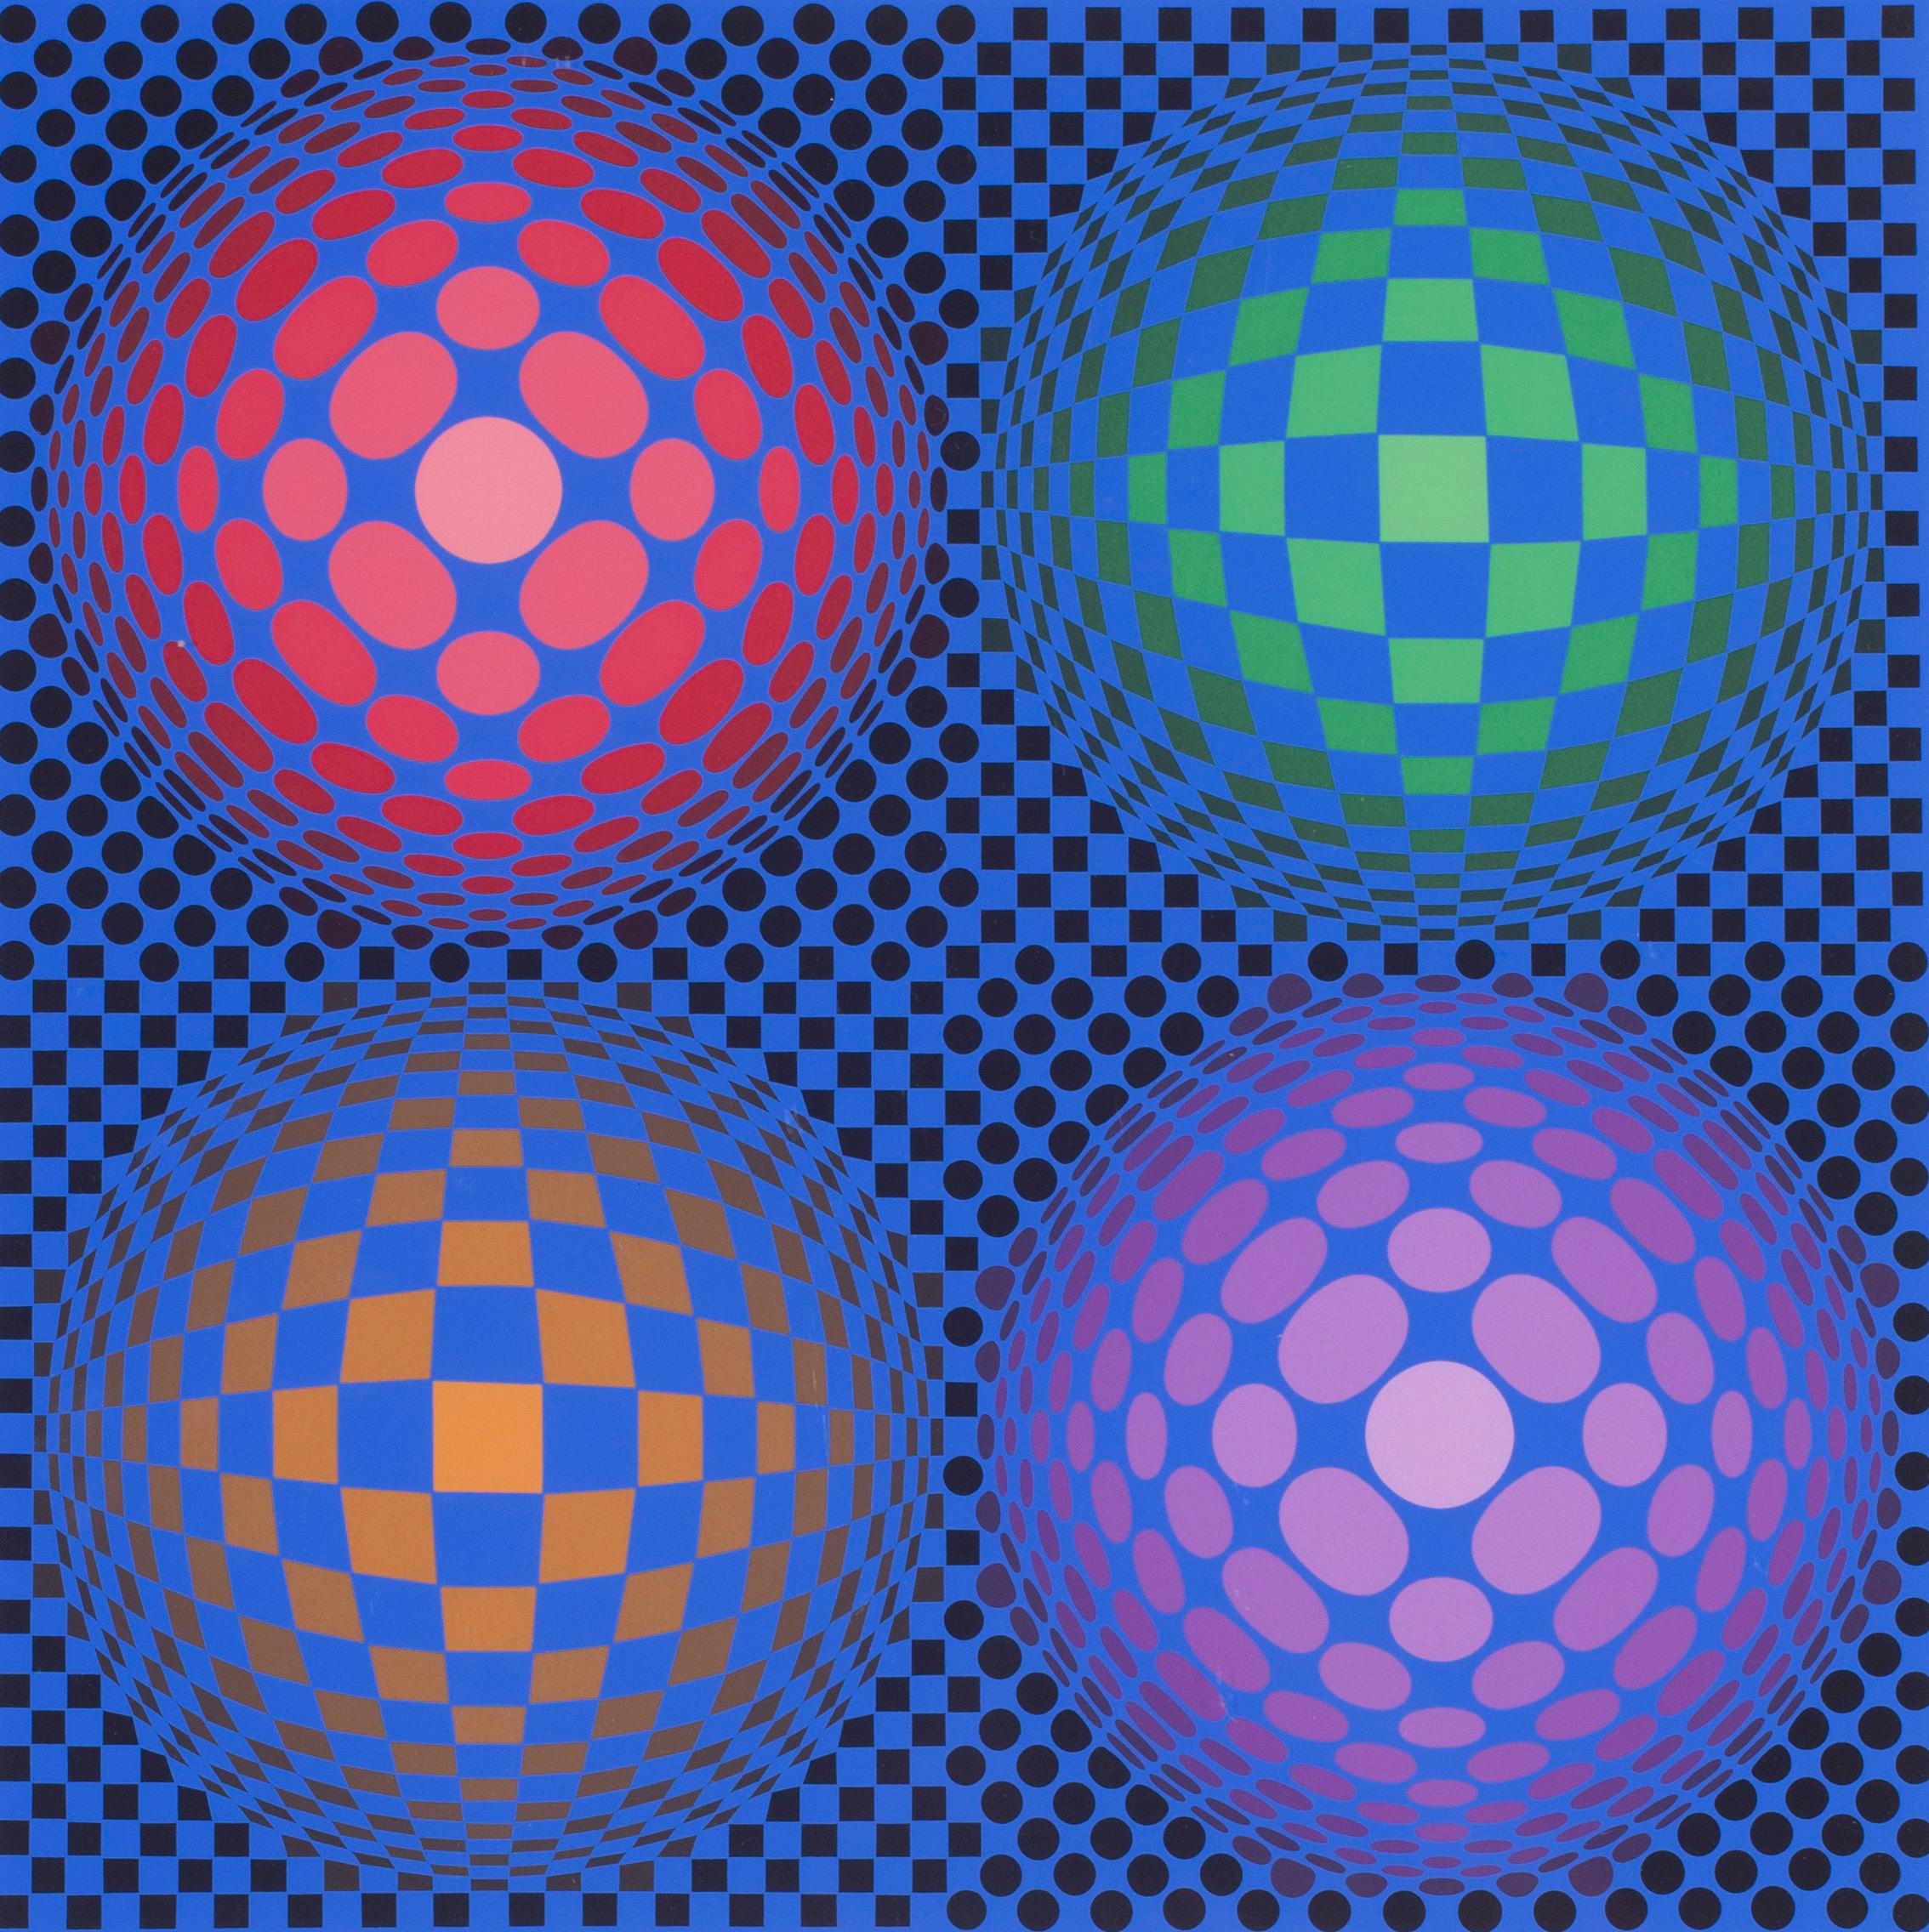 Victor Vasarely Abstract Print - 4 spheres